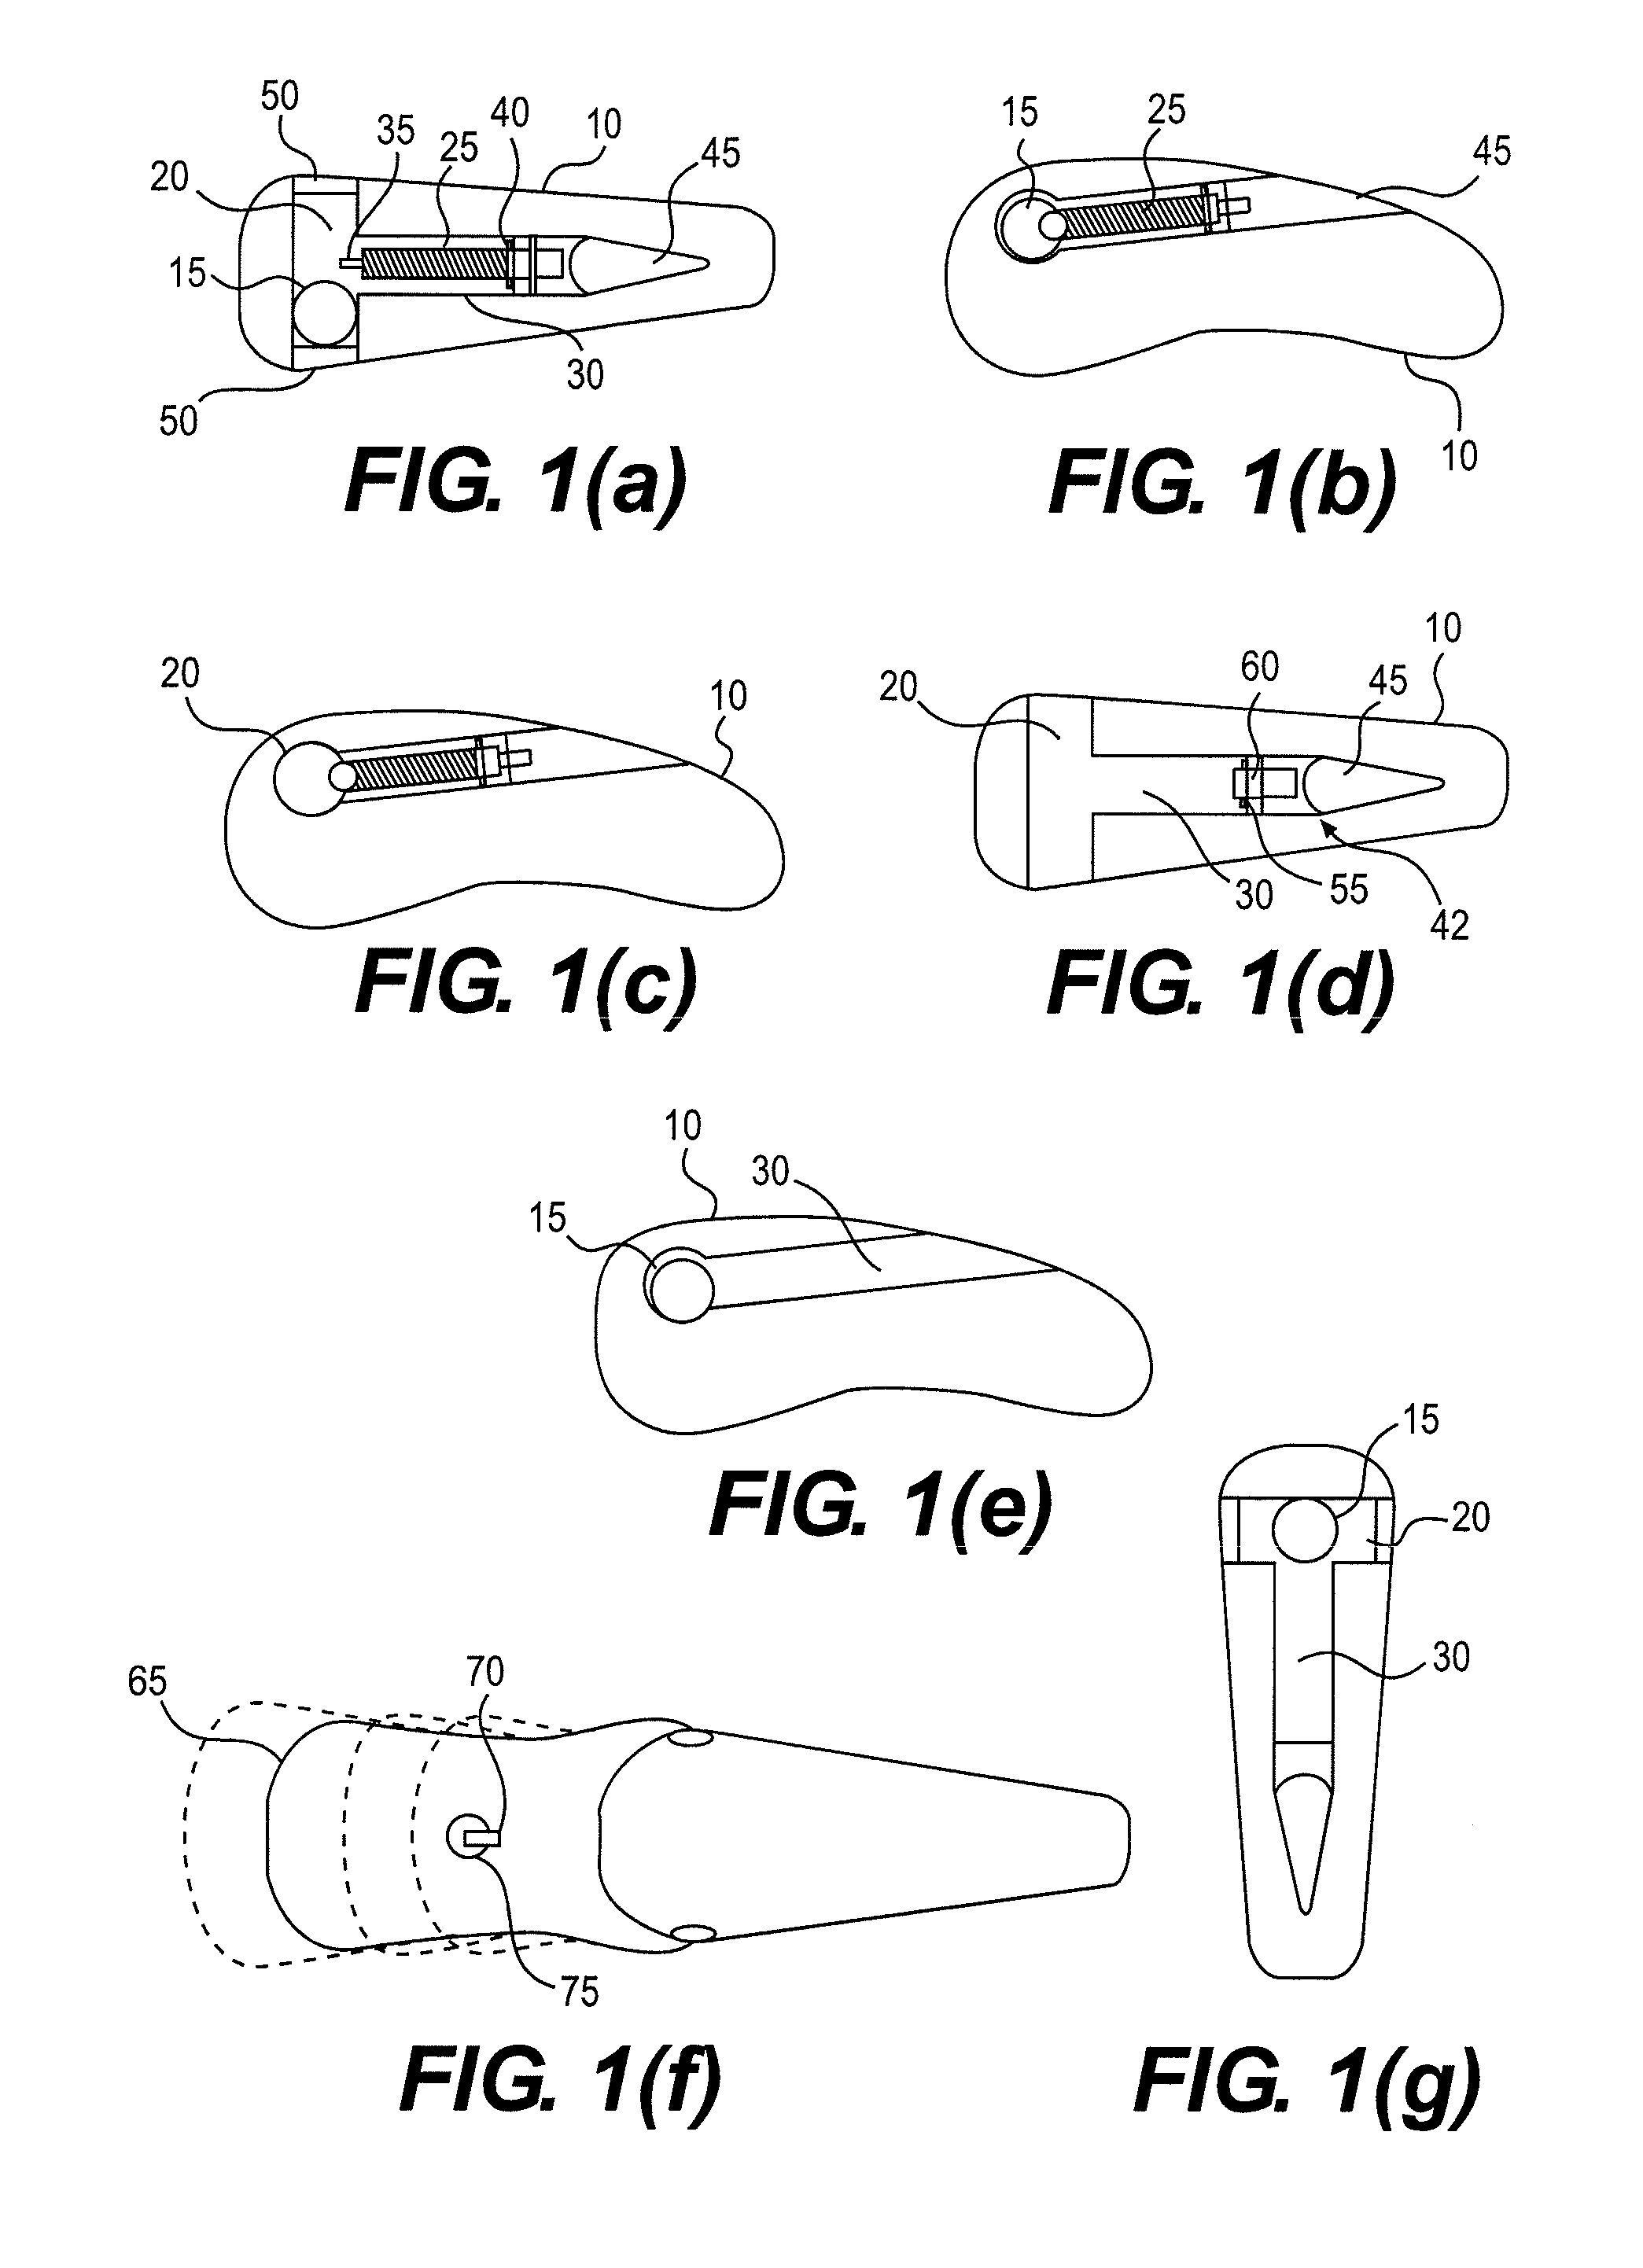 Fishing lure with mechanically-actuated lower frequency tone generation device